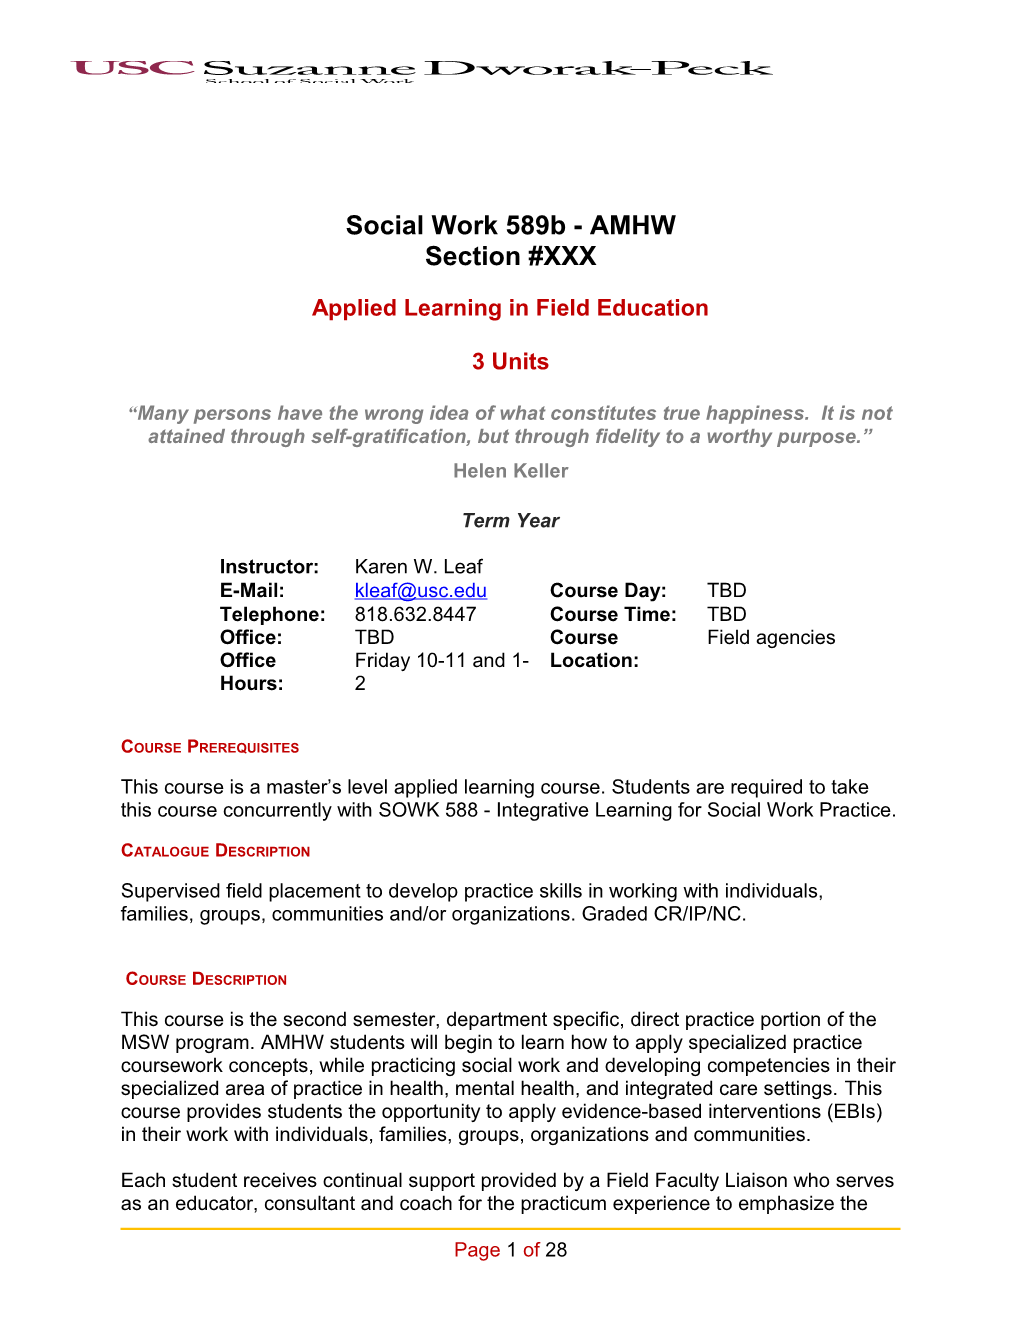 School of Social Work Syllabus Template Guide s16